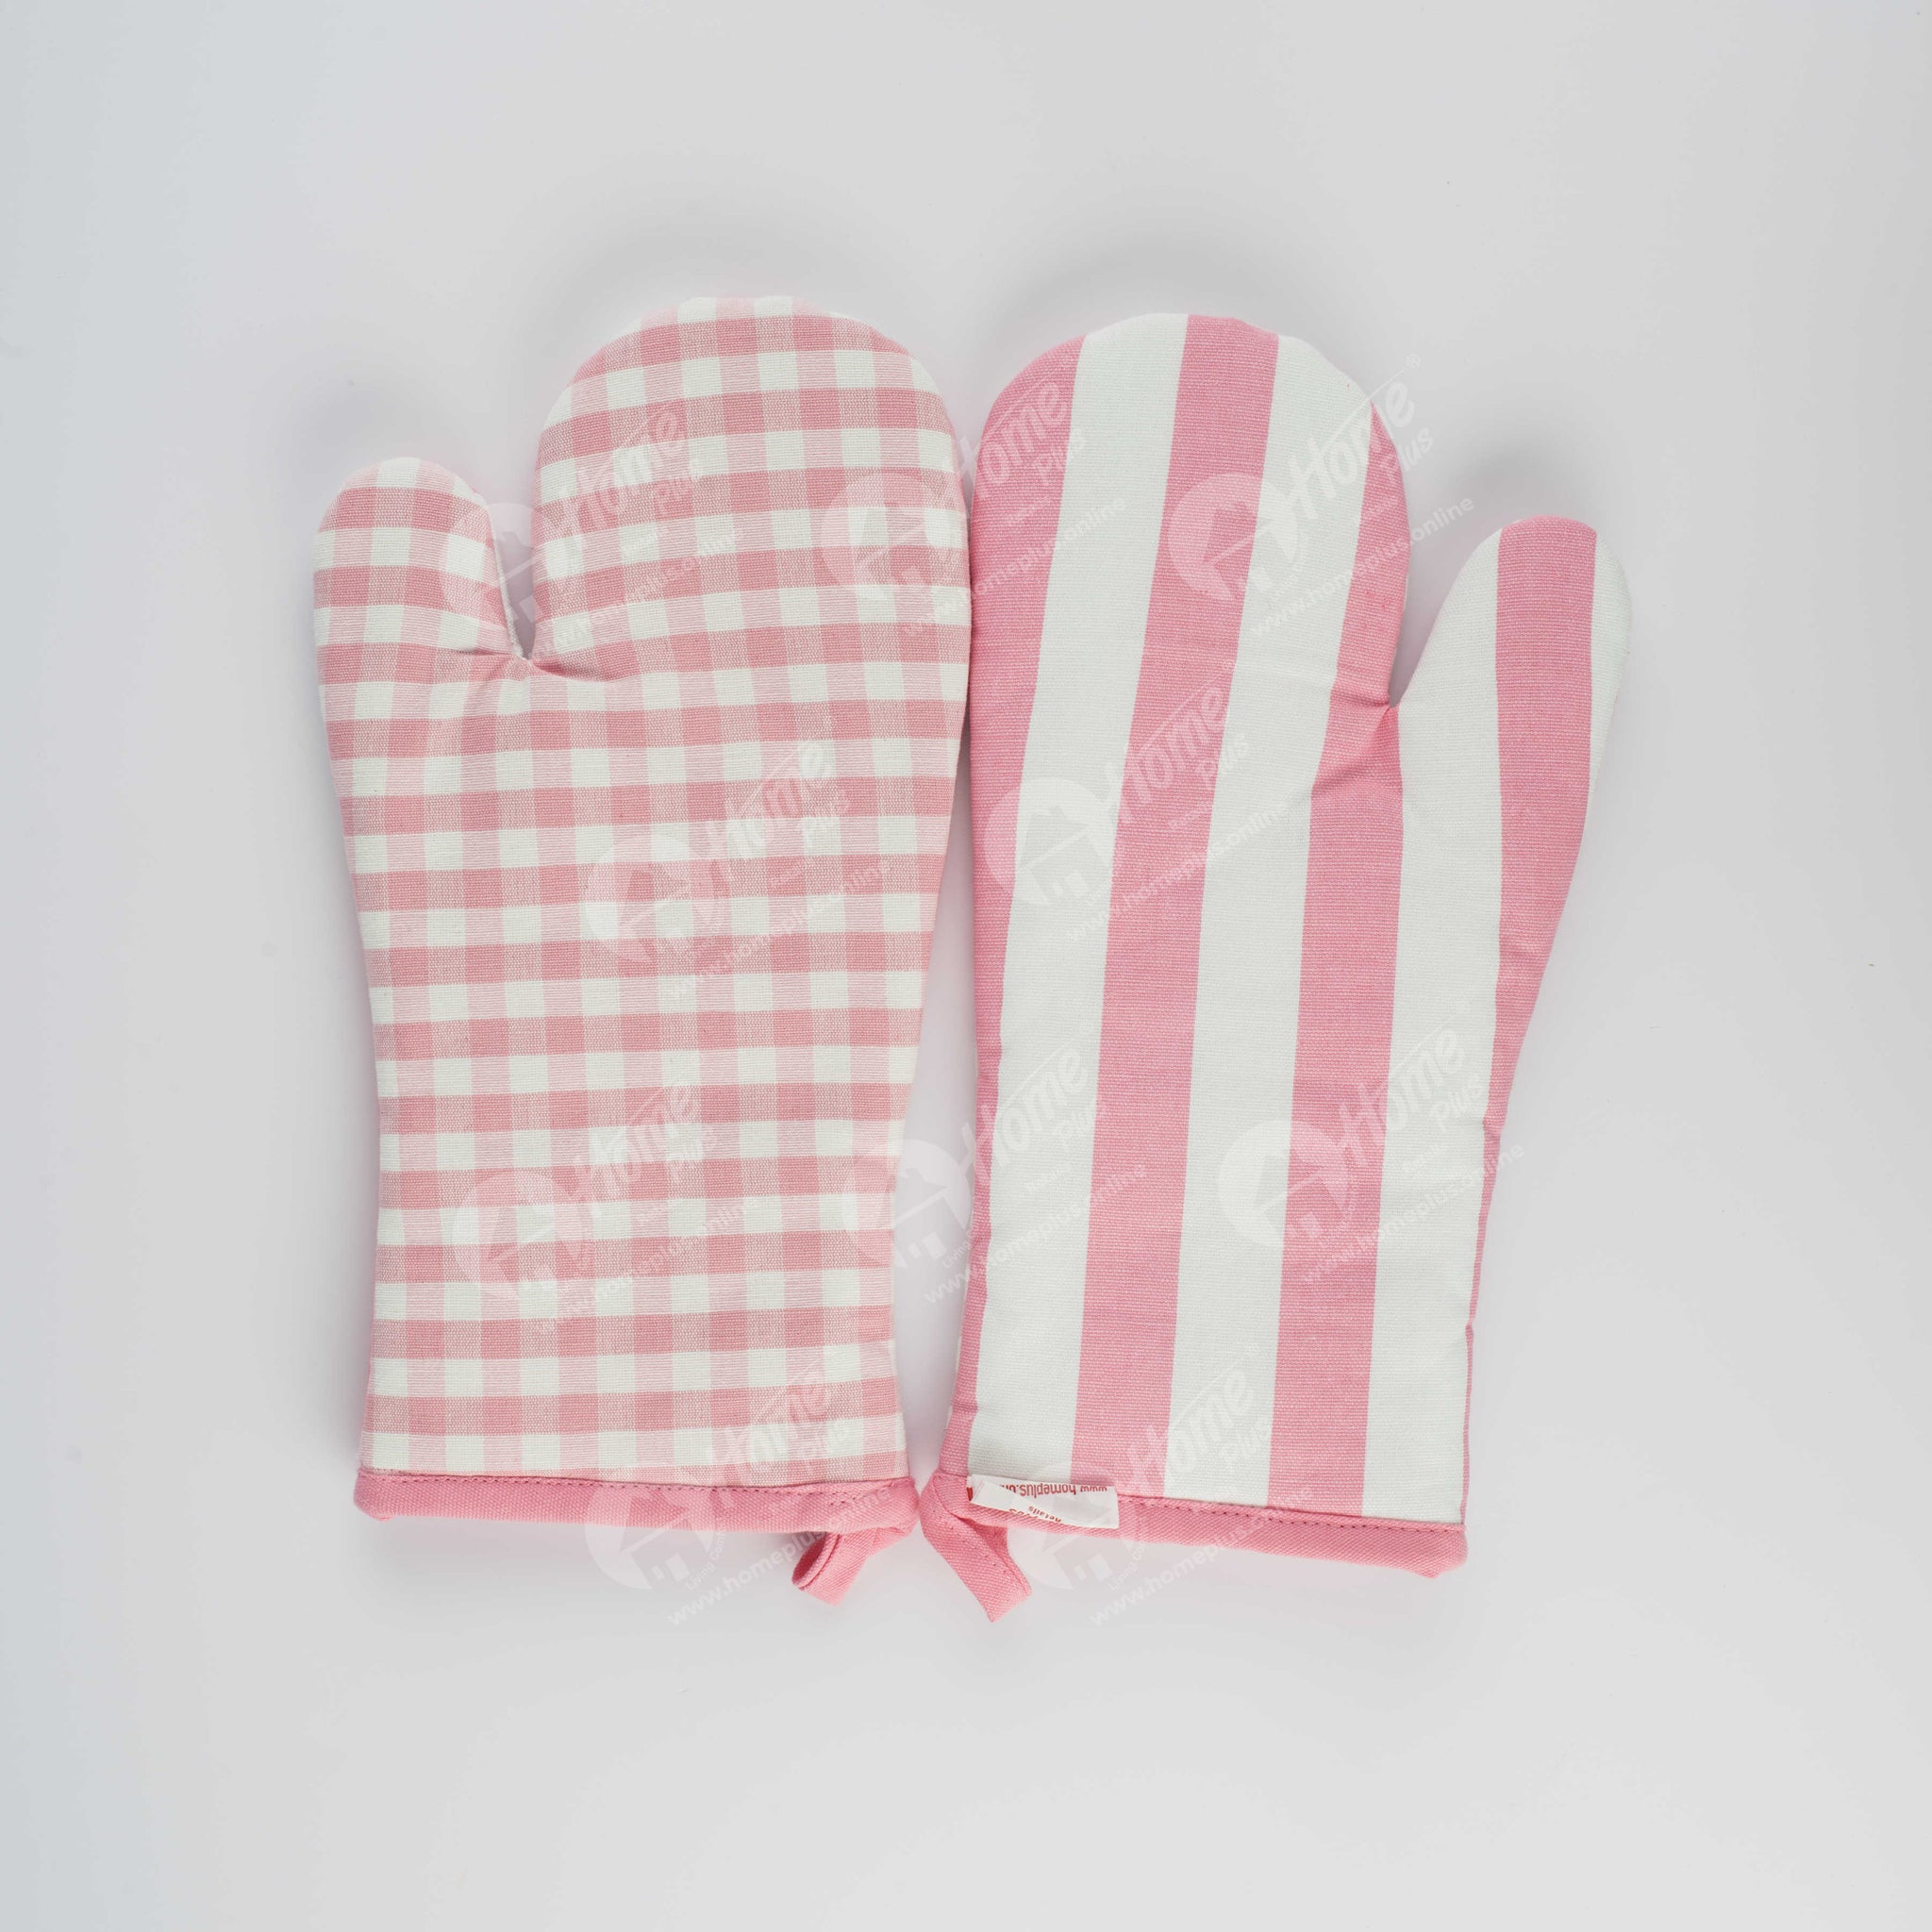 Glove - Gingham Check Pink